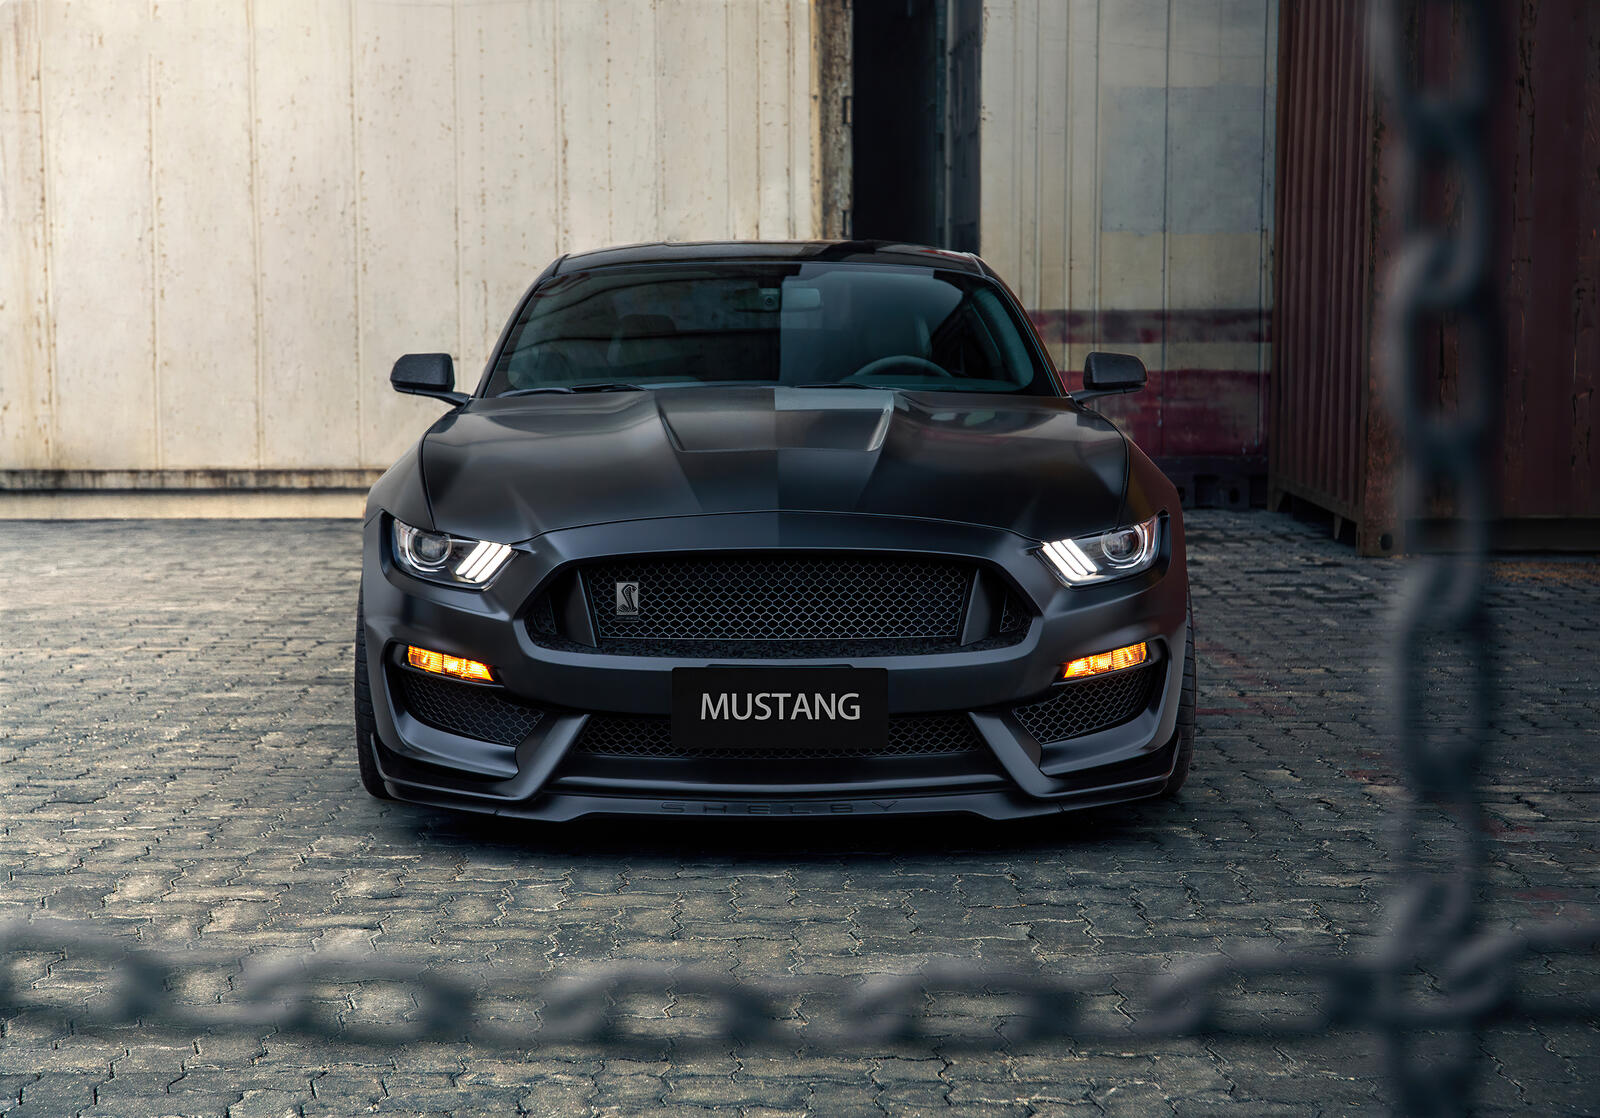 Wallpapers Ford Mustang cars black car on the desktop